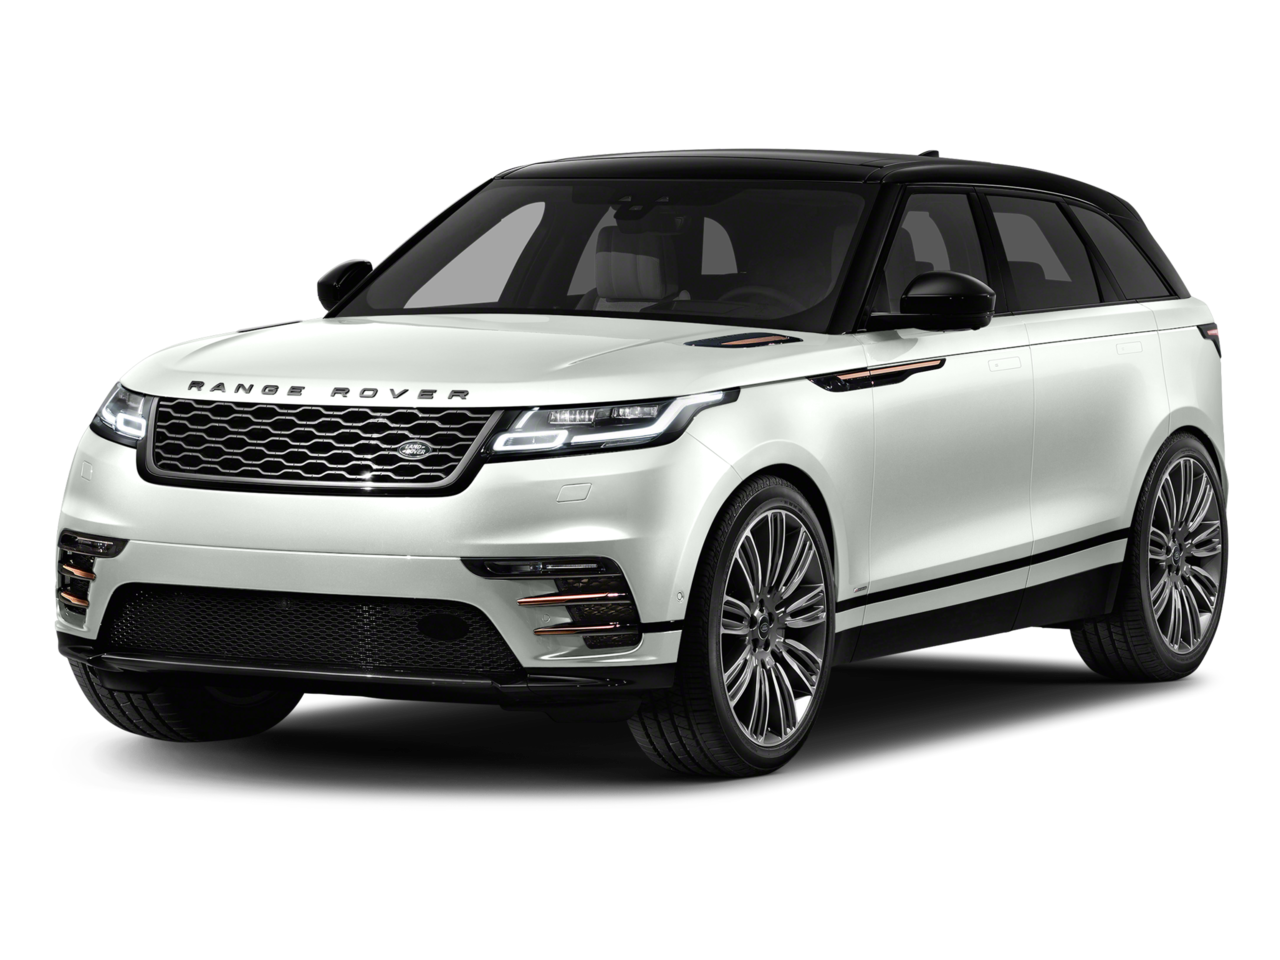 Land Rover PNG Image HD